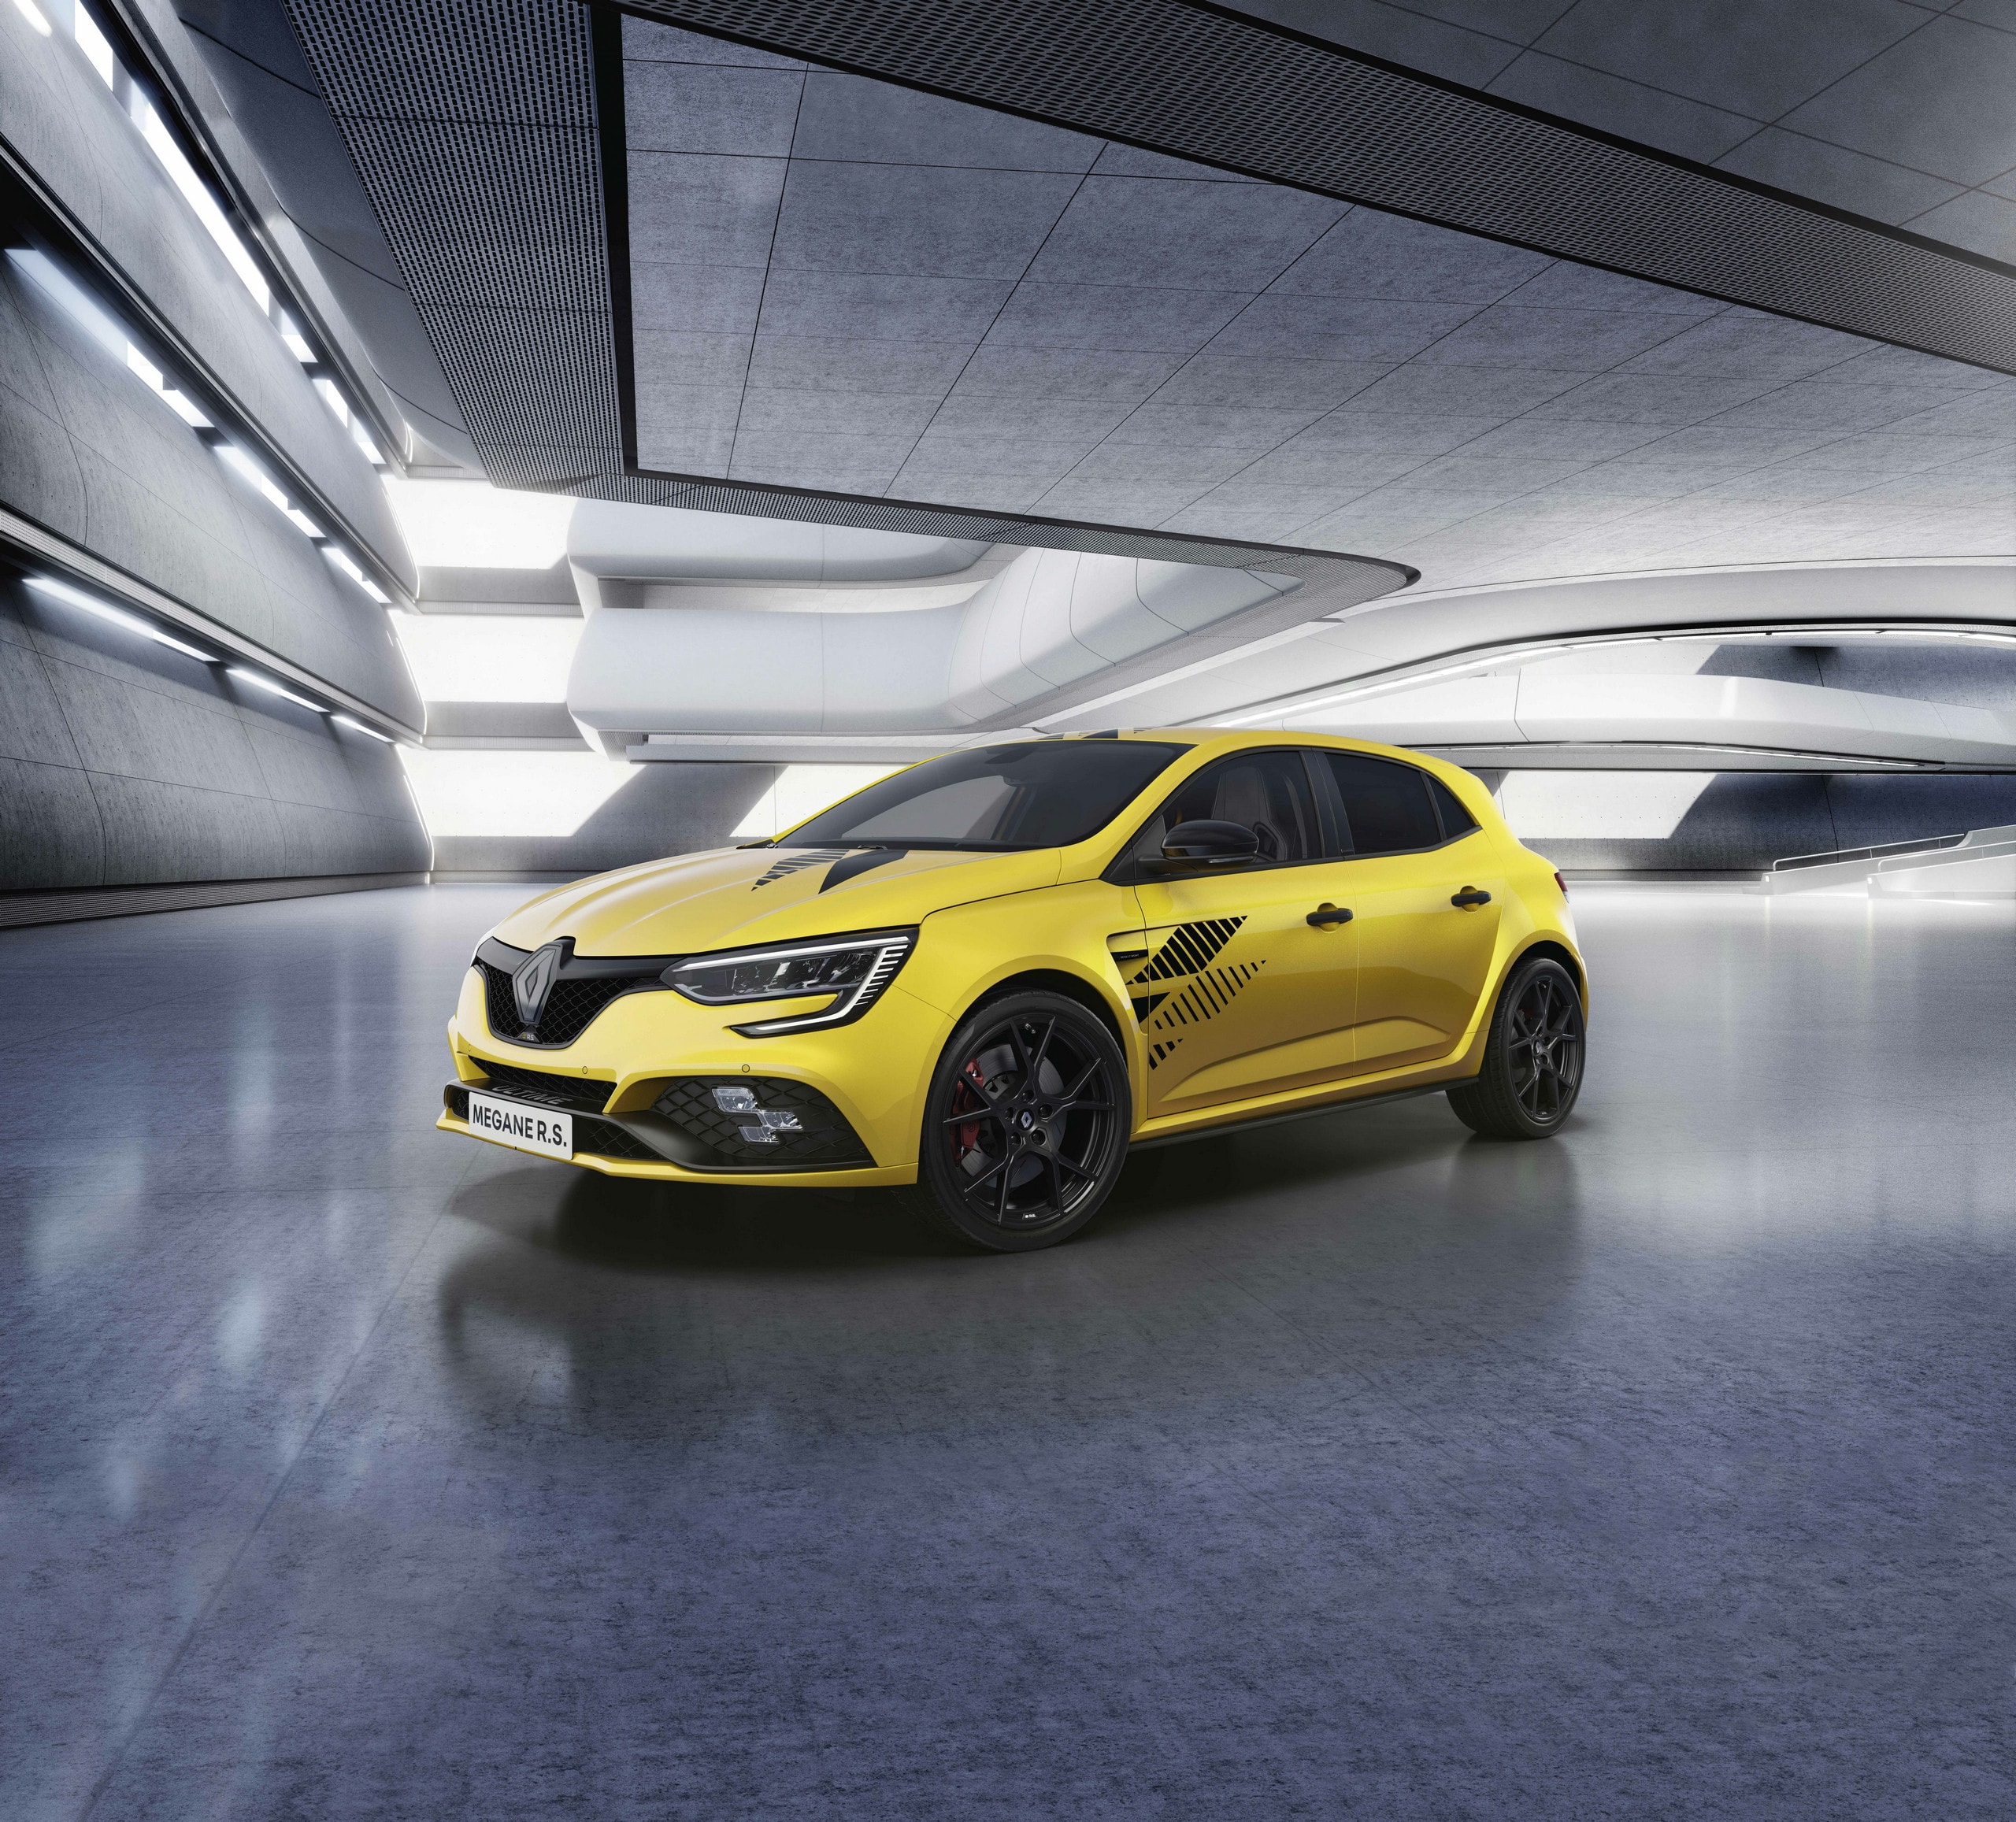 High-Performance Renault Sport Models Get A New Name